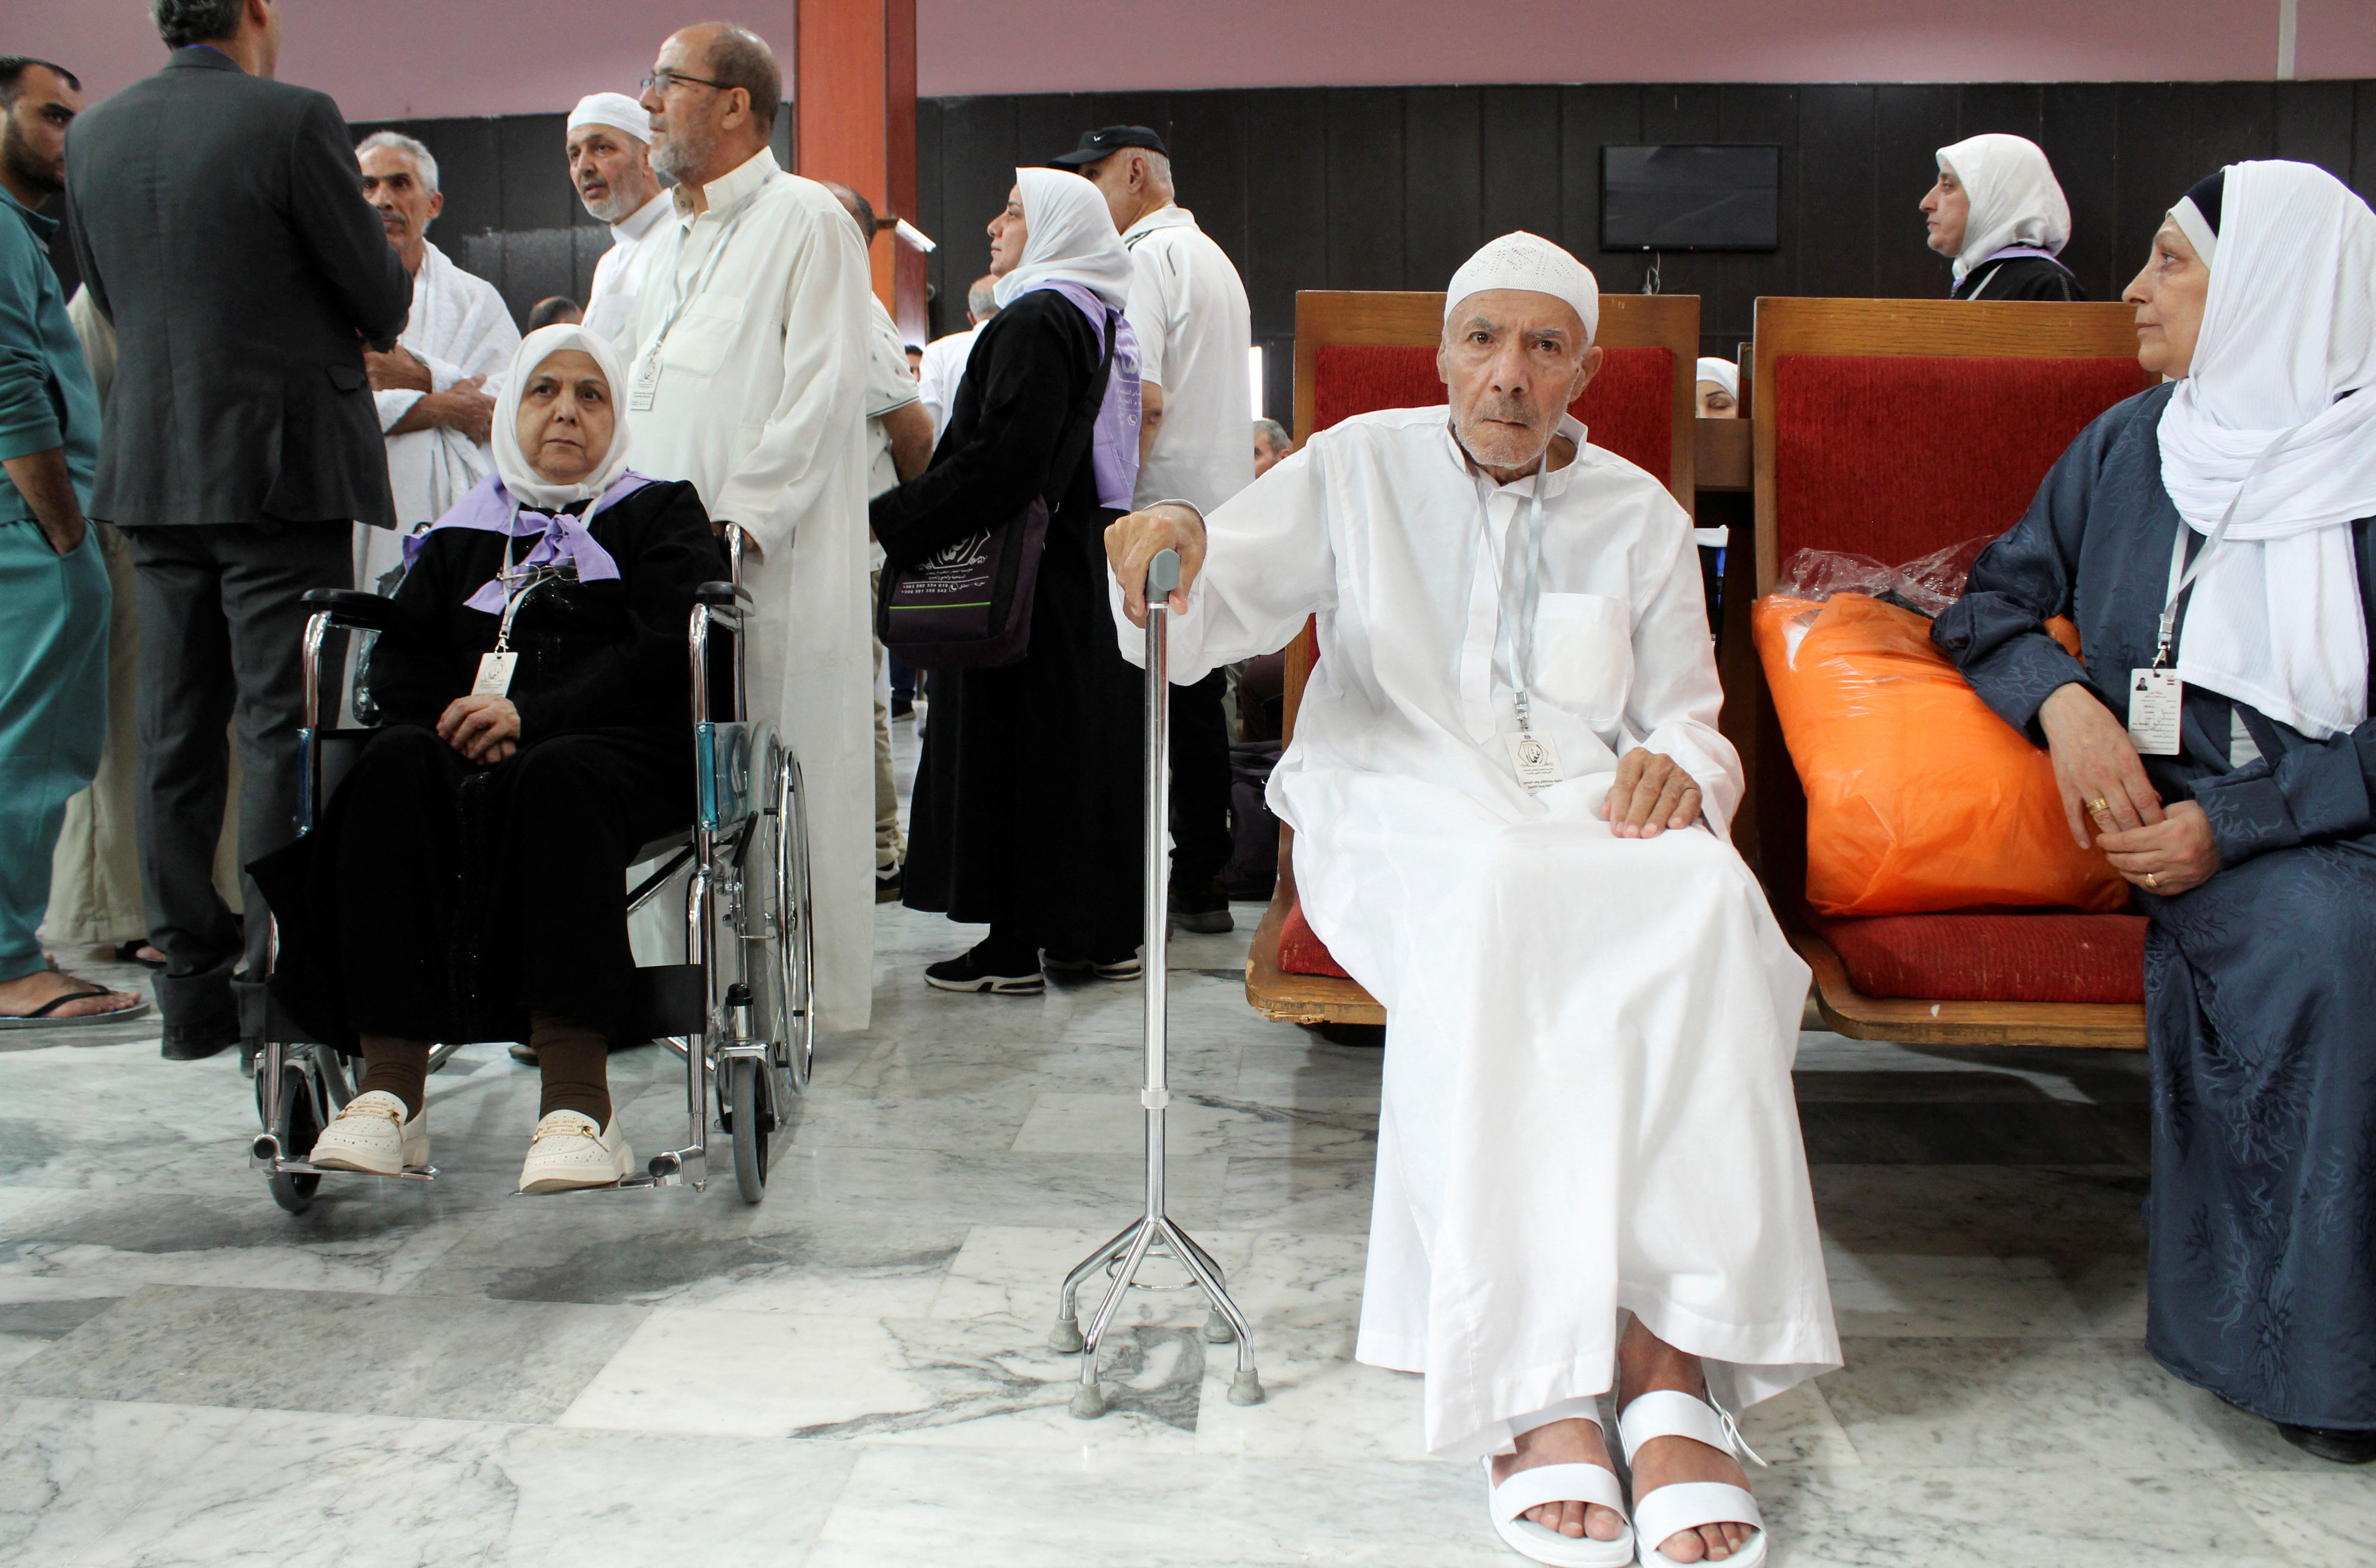 Syrian pilgrims wait to board a flight to Saudi Arabia at Damascus airport